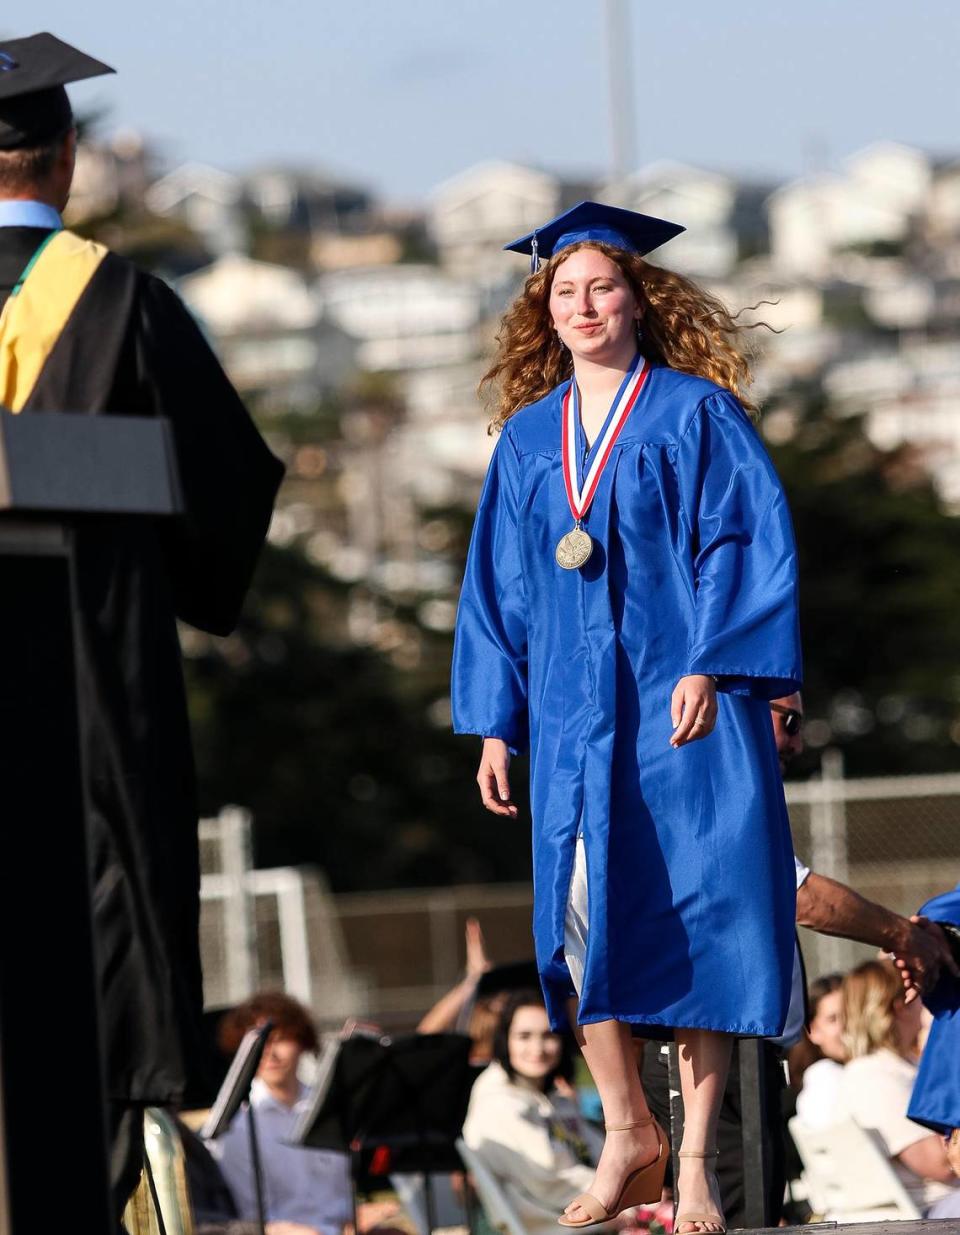 At Morro Bay High School, 180 grads were honored Thursday evening in a ceremony at the school’s football field. Salutatorian Rae Ruane walks up to receive her diploma.